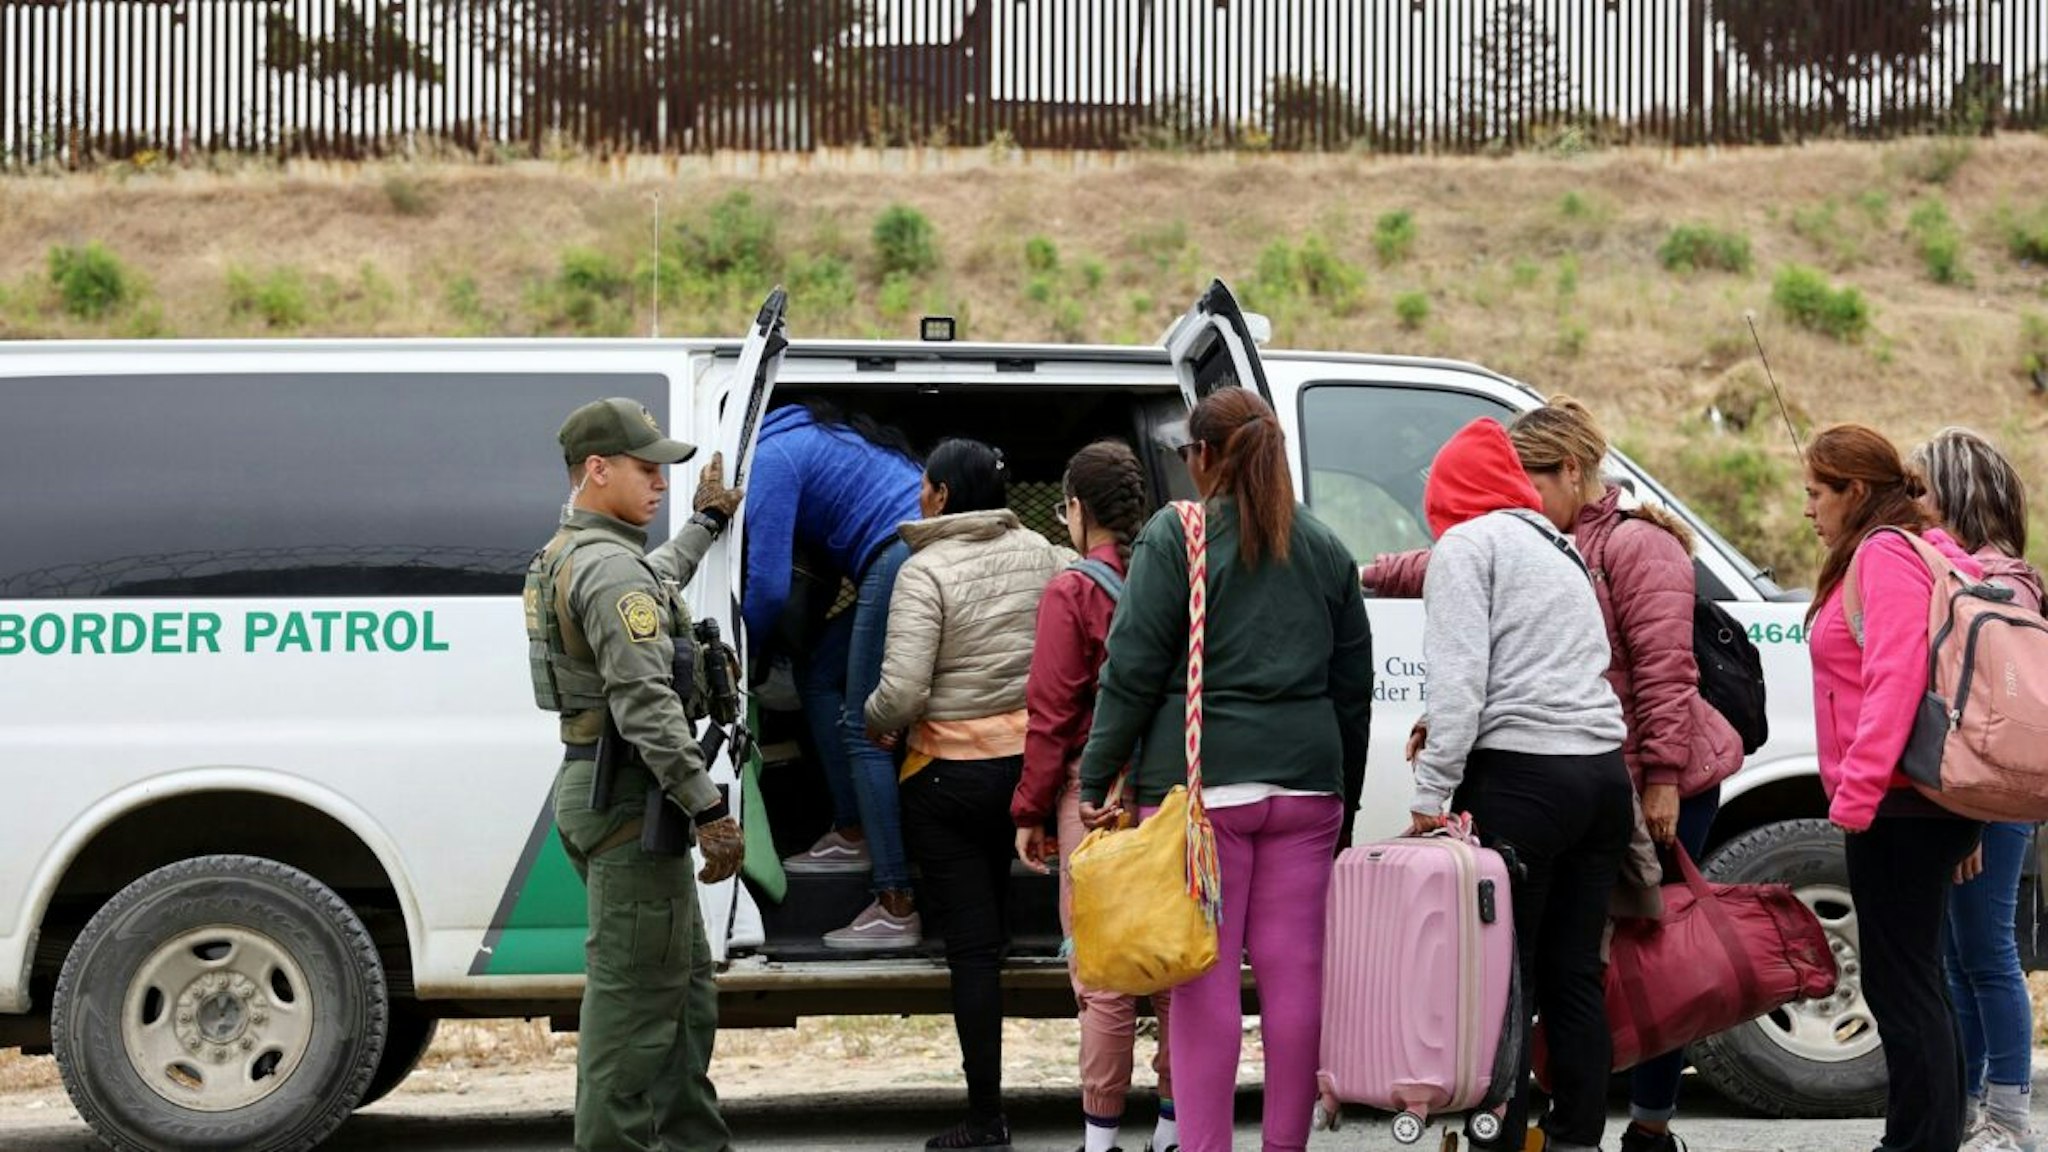 A U.S. Border Patrol agent keeps watch as immigrants enter a vehicle to be transported from a makeshift camp between border walls, between the U.S. and Mexico, on May 13, 2023 in San Diego, California.